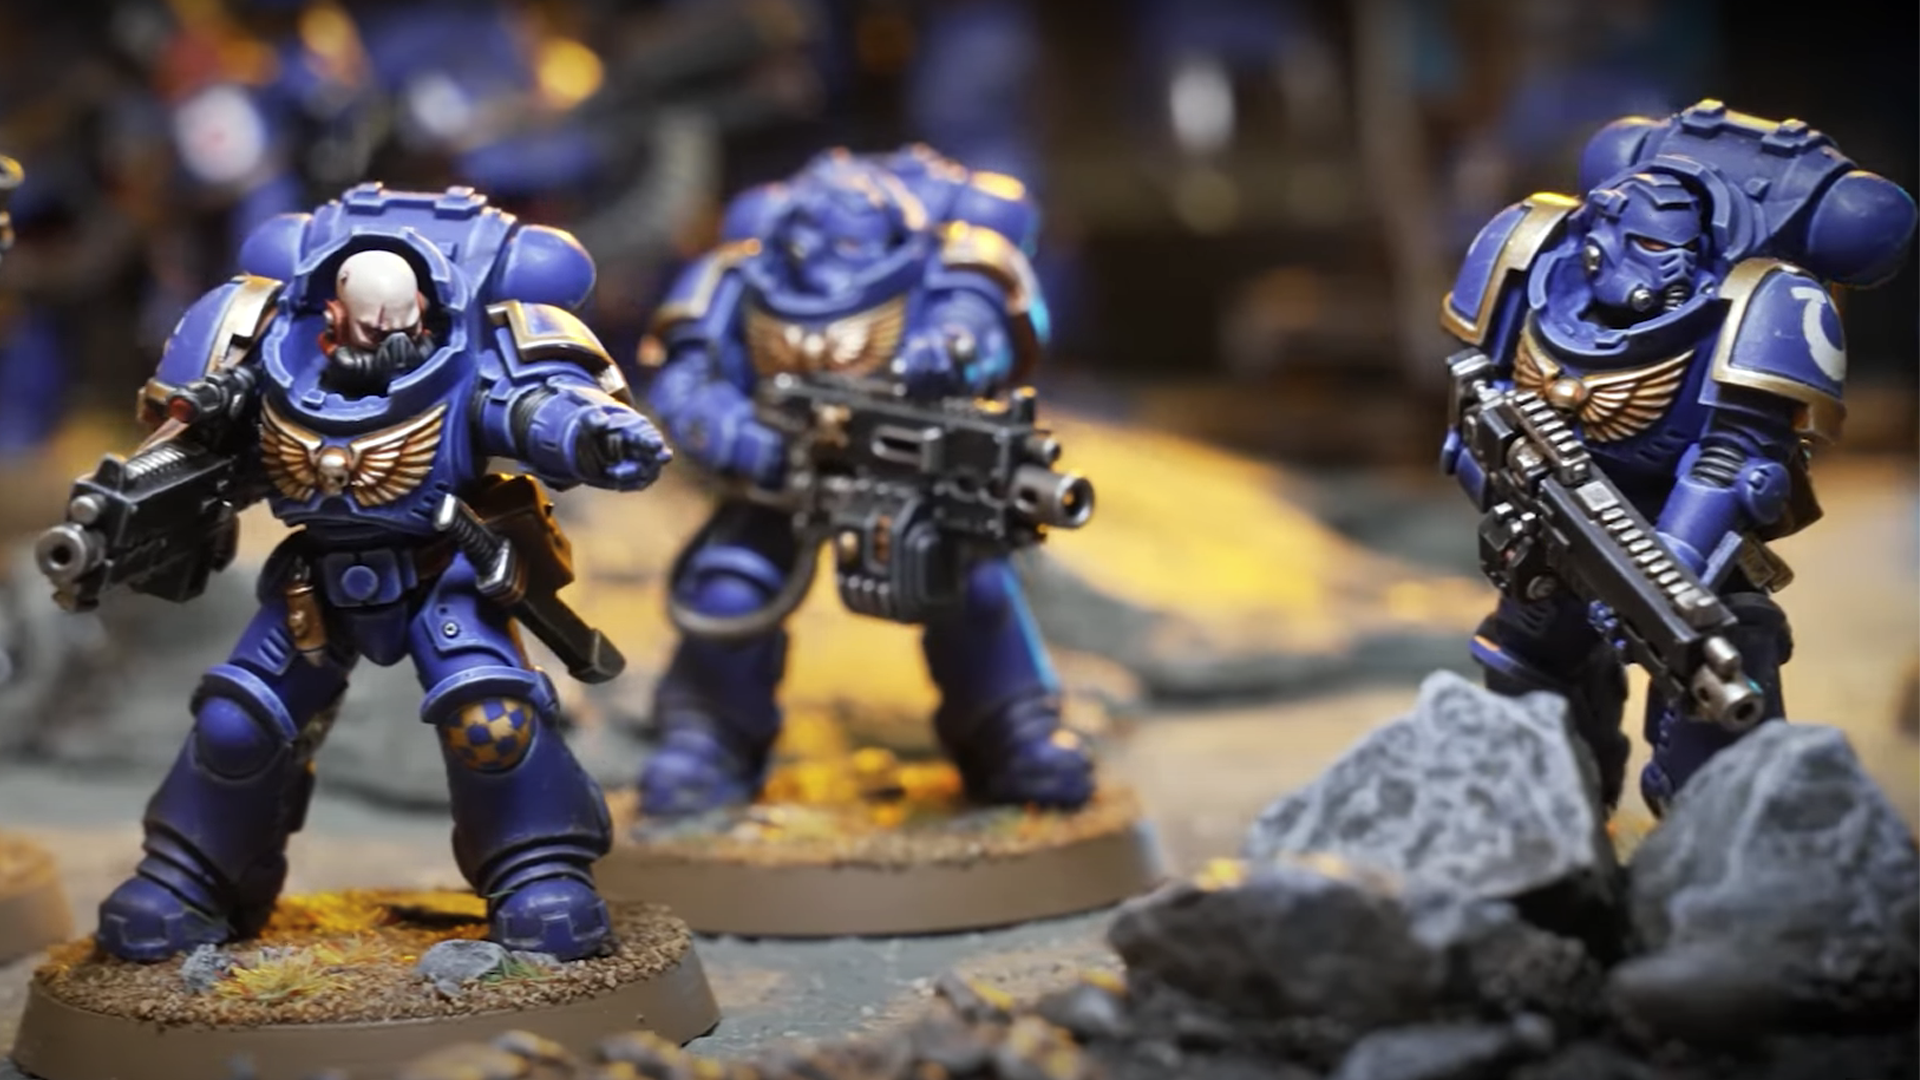 Image for Warhammer 40,000’s 10th Edition revealed, army rules releasing for free this summer